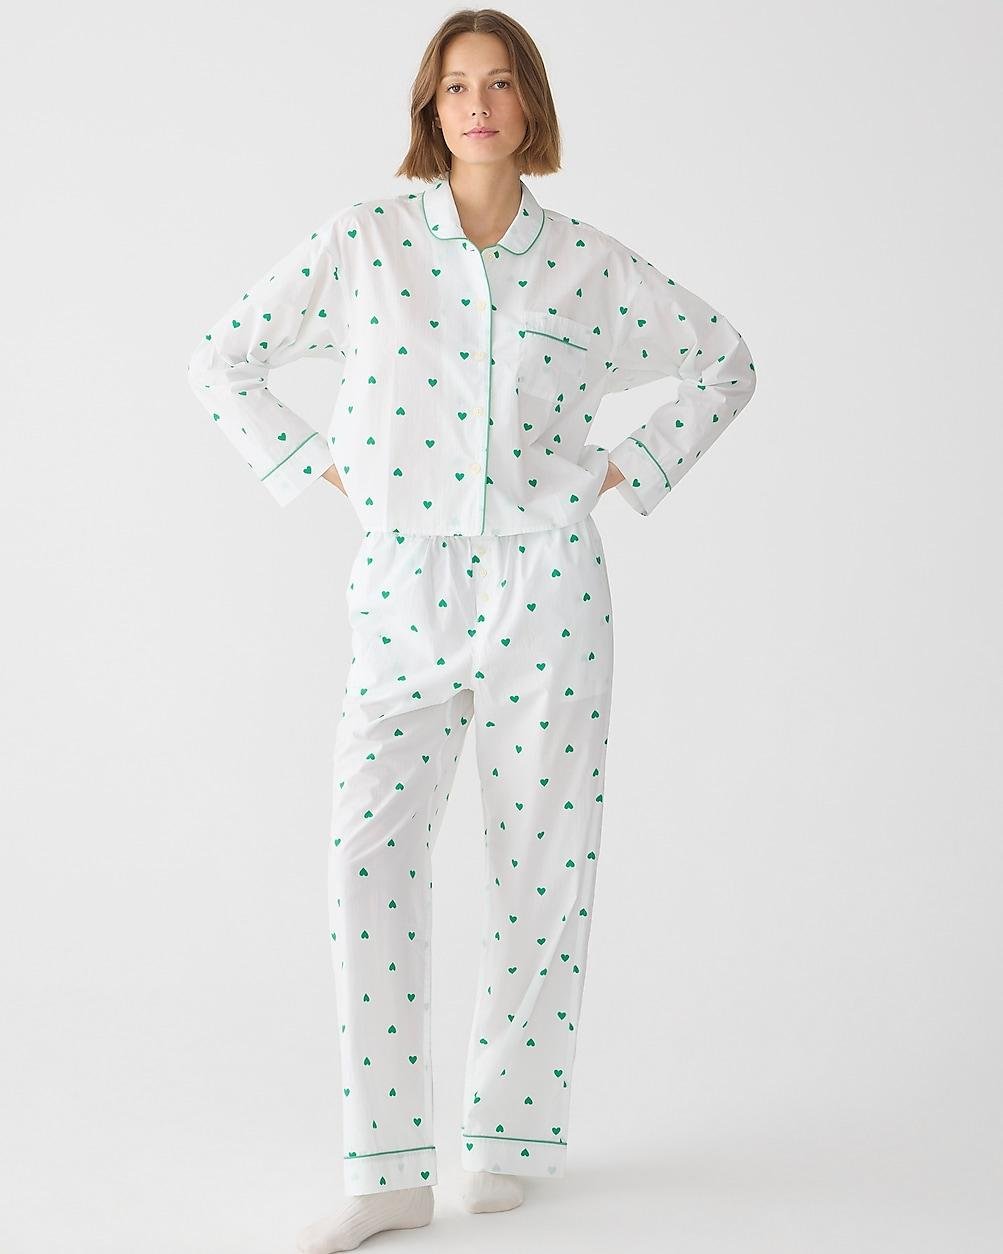 Long-sleeve cropped cotton poplin pajama pant set in green heart print by J.CREW